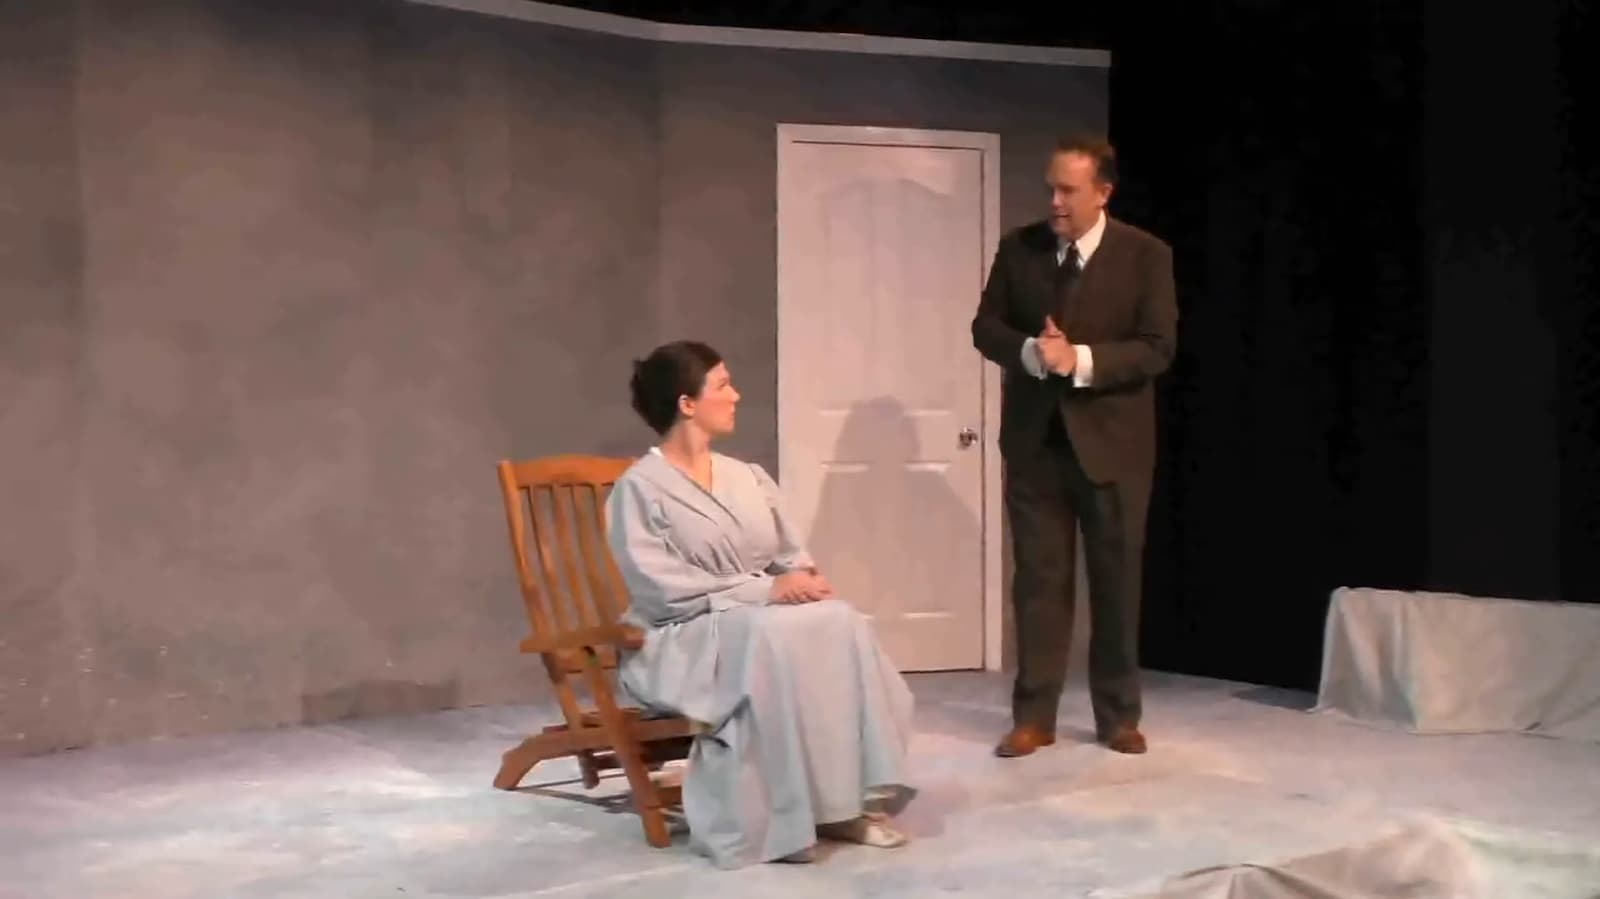 A man in a suit stands talking to a seated woman in a stage play setting